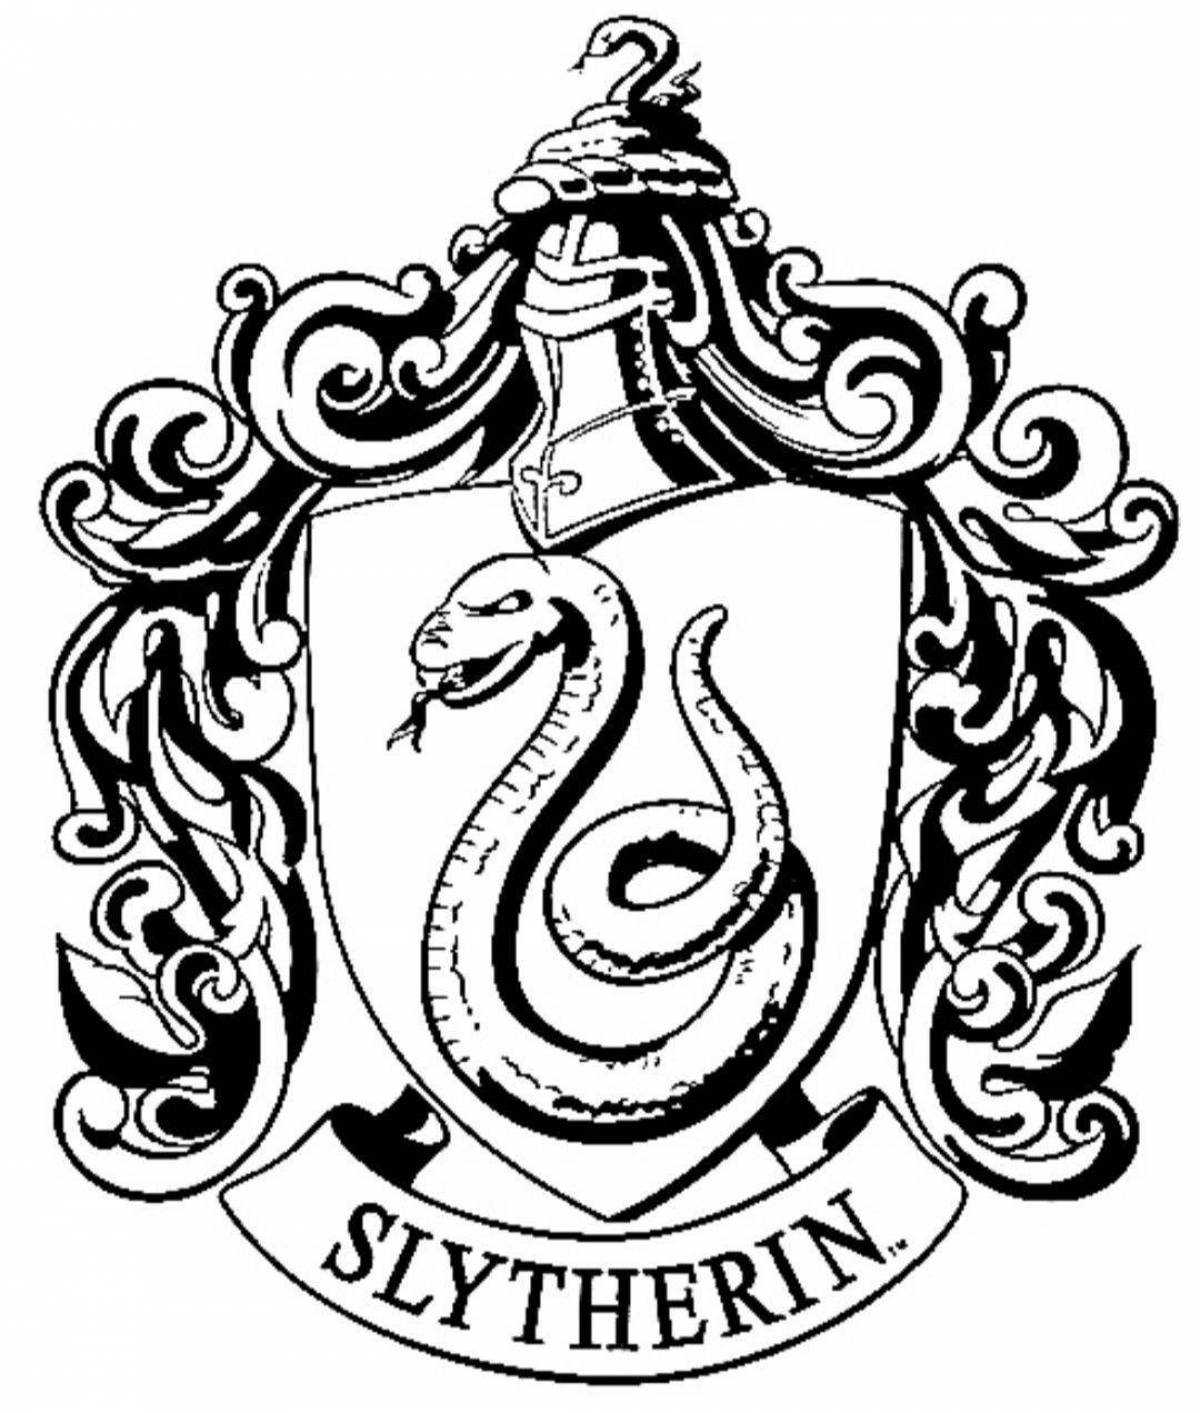 Slytherin majestic coat of arms coloring page